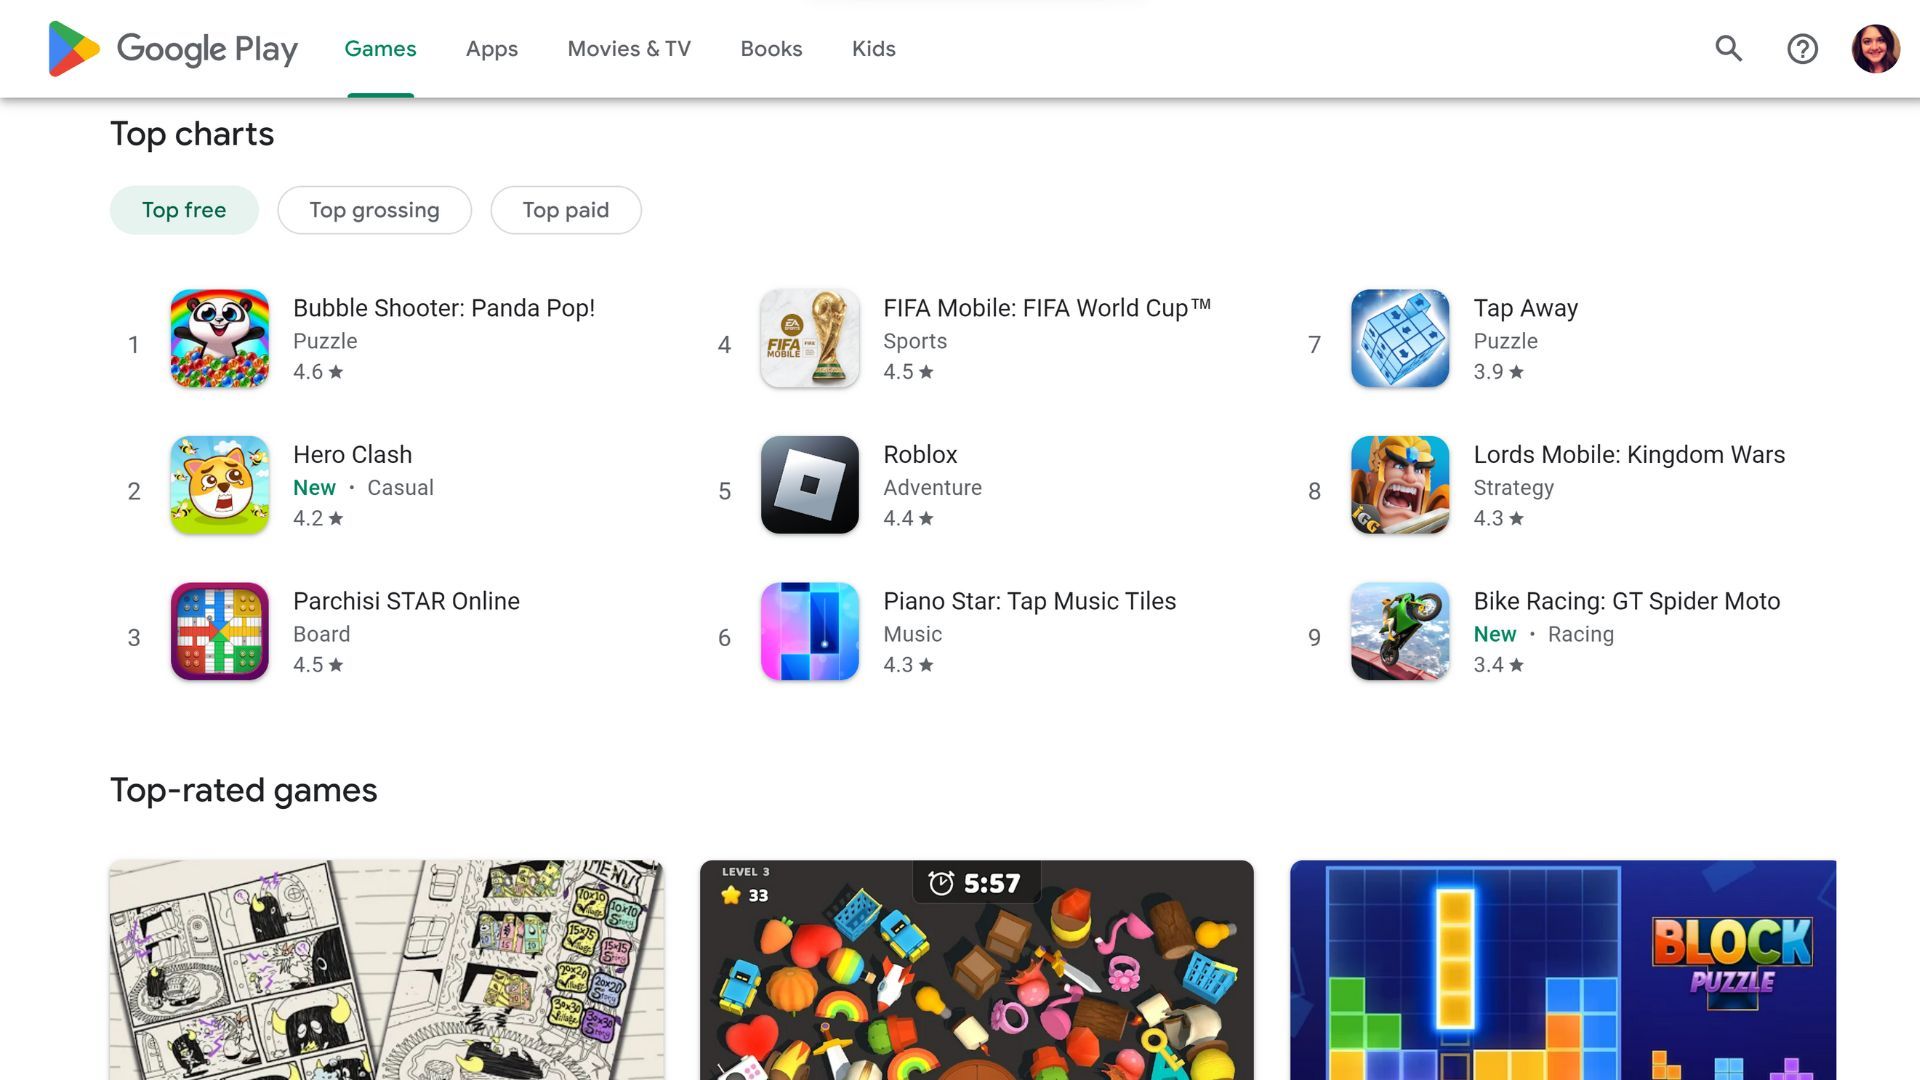 screenshot of google play store website, showing tabs for games, apps, movies & TV, books, and kids